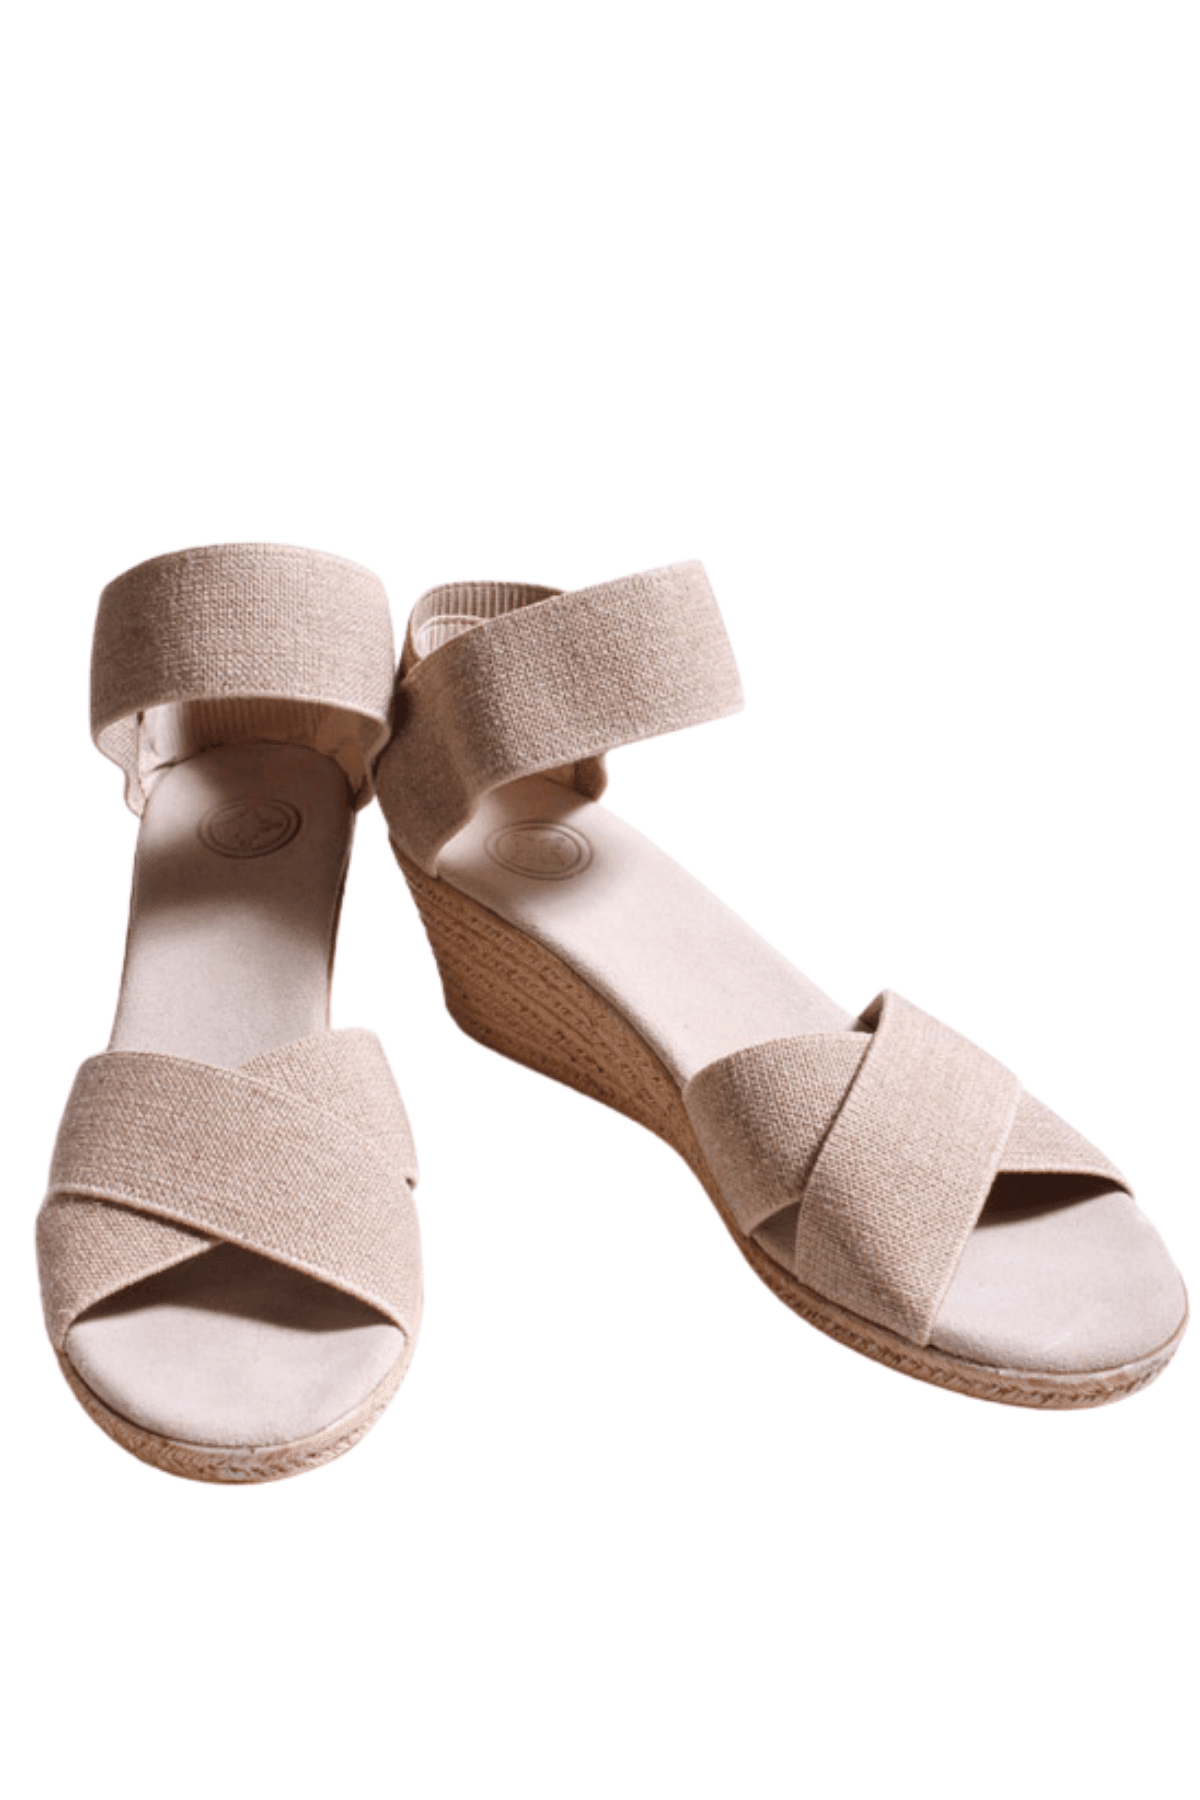 linen sandal has a 2" faux espadrille wedge bottom with a padded insole and elastic stretch upper